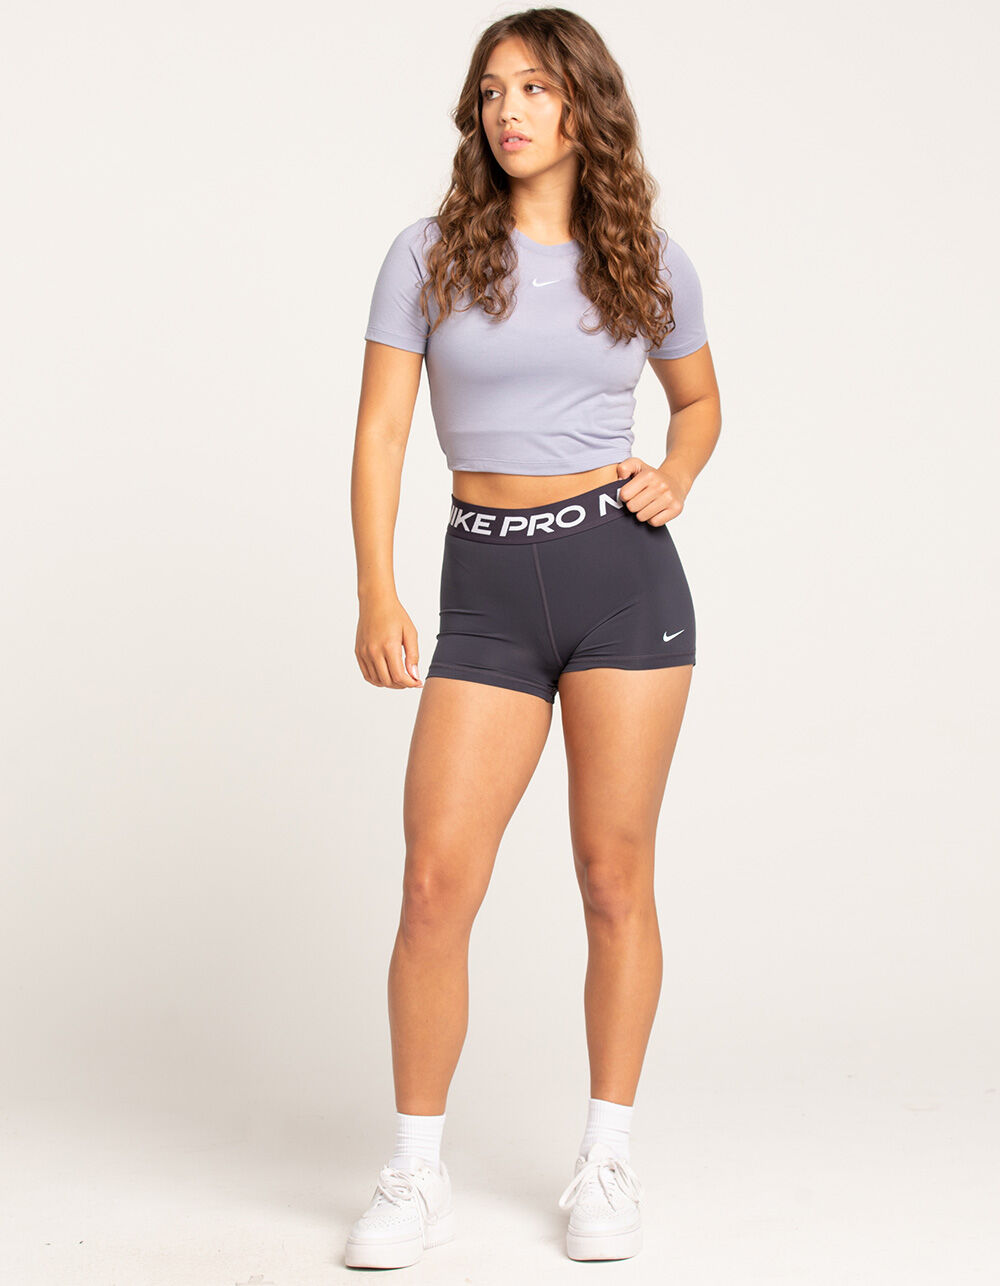 Nike Pro Shorts Women (1 stores) see best prices now »